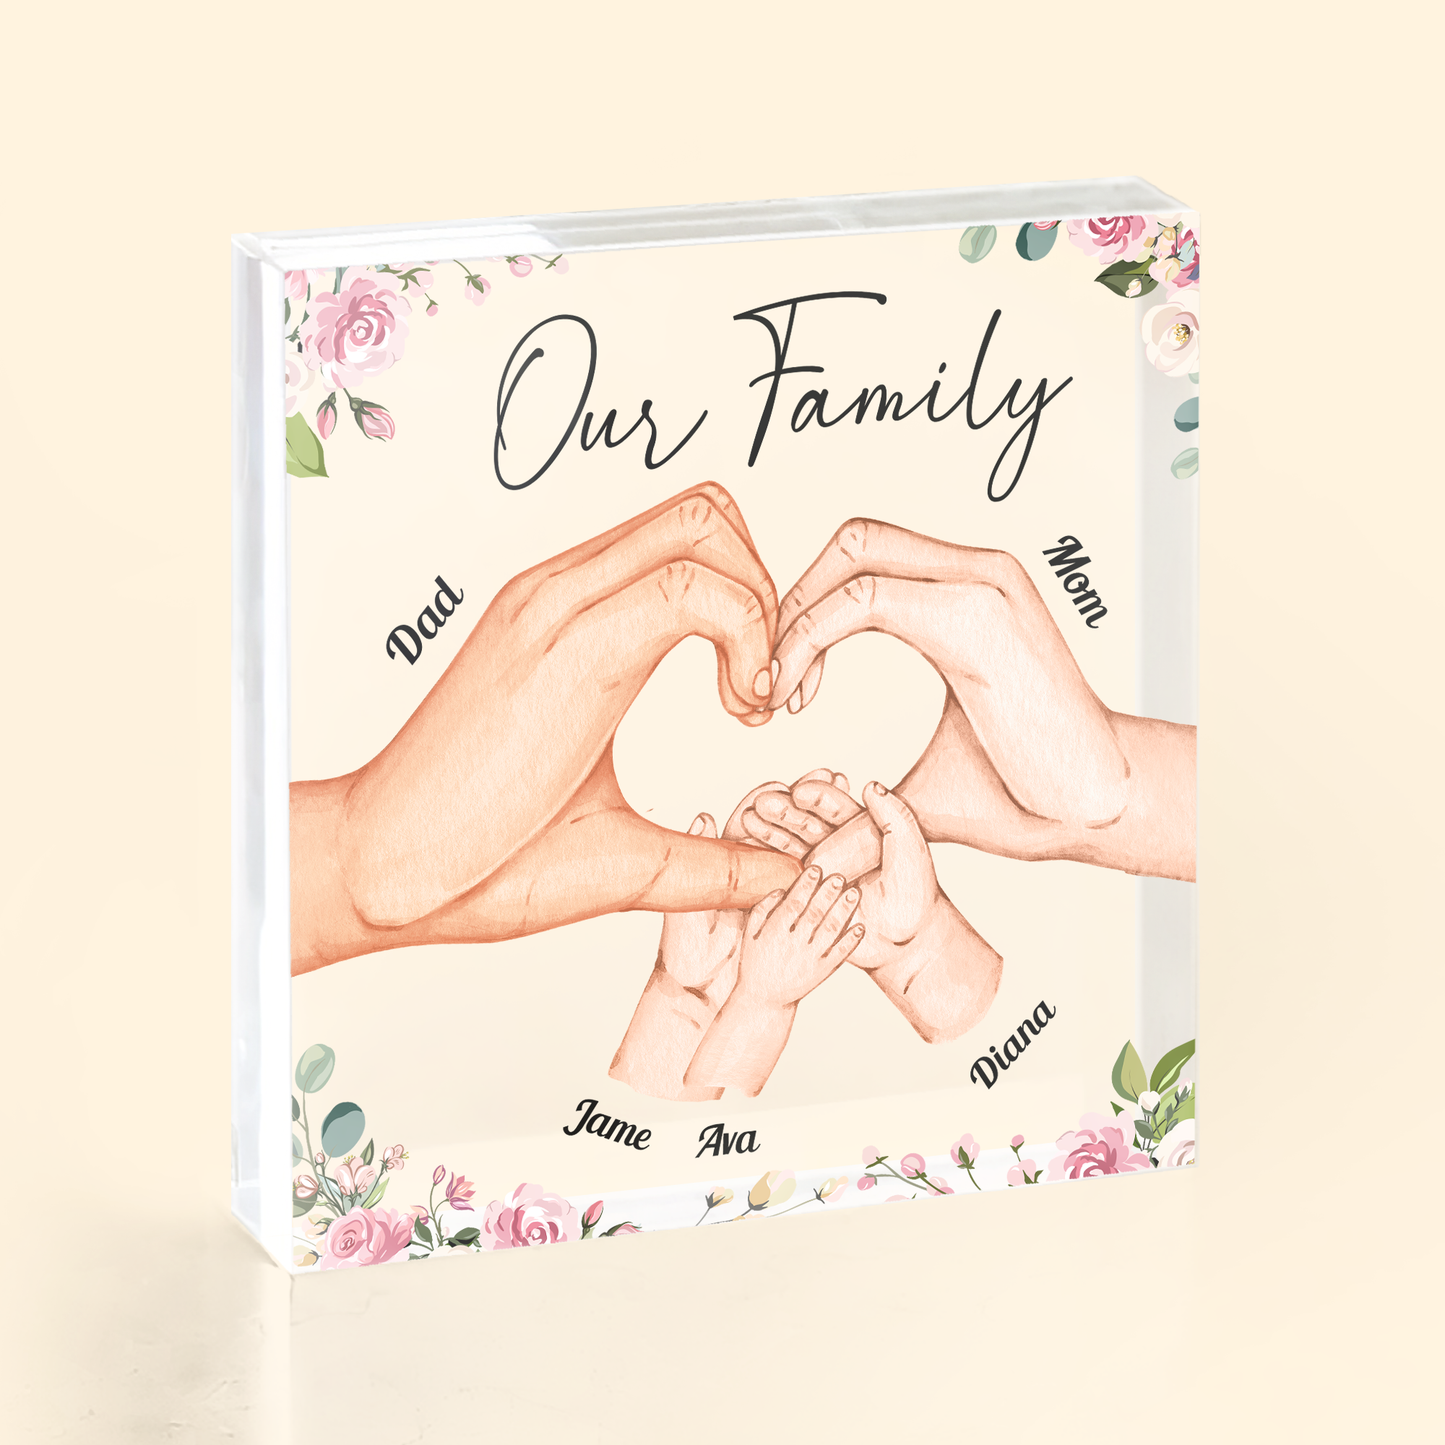 Heart Holding Hands Parents - Custom Shaped Square-Shaped Acrylic Plaque